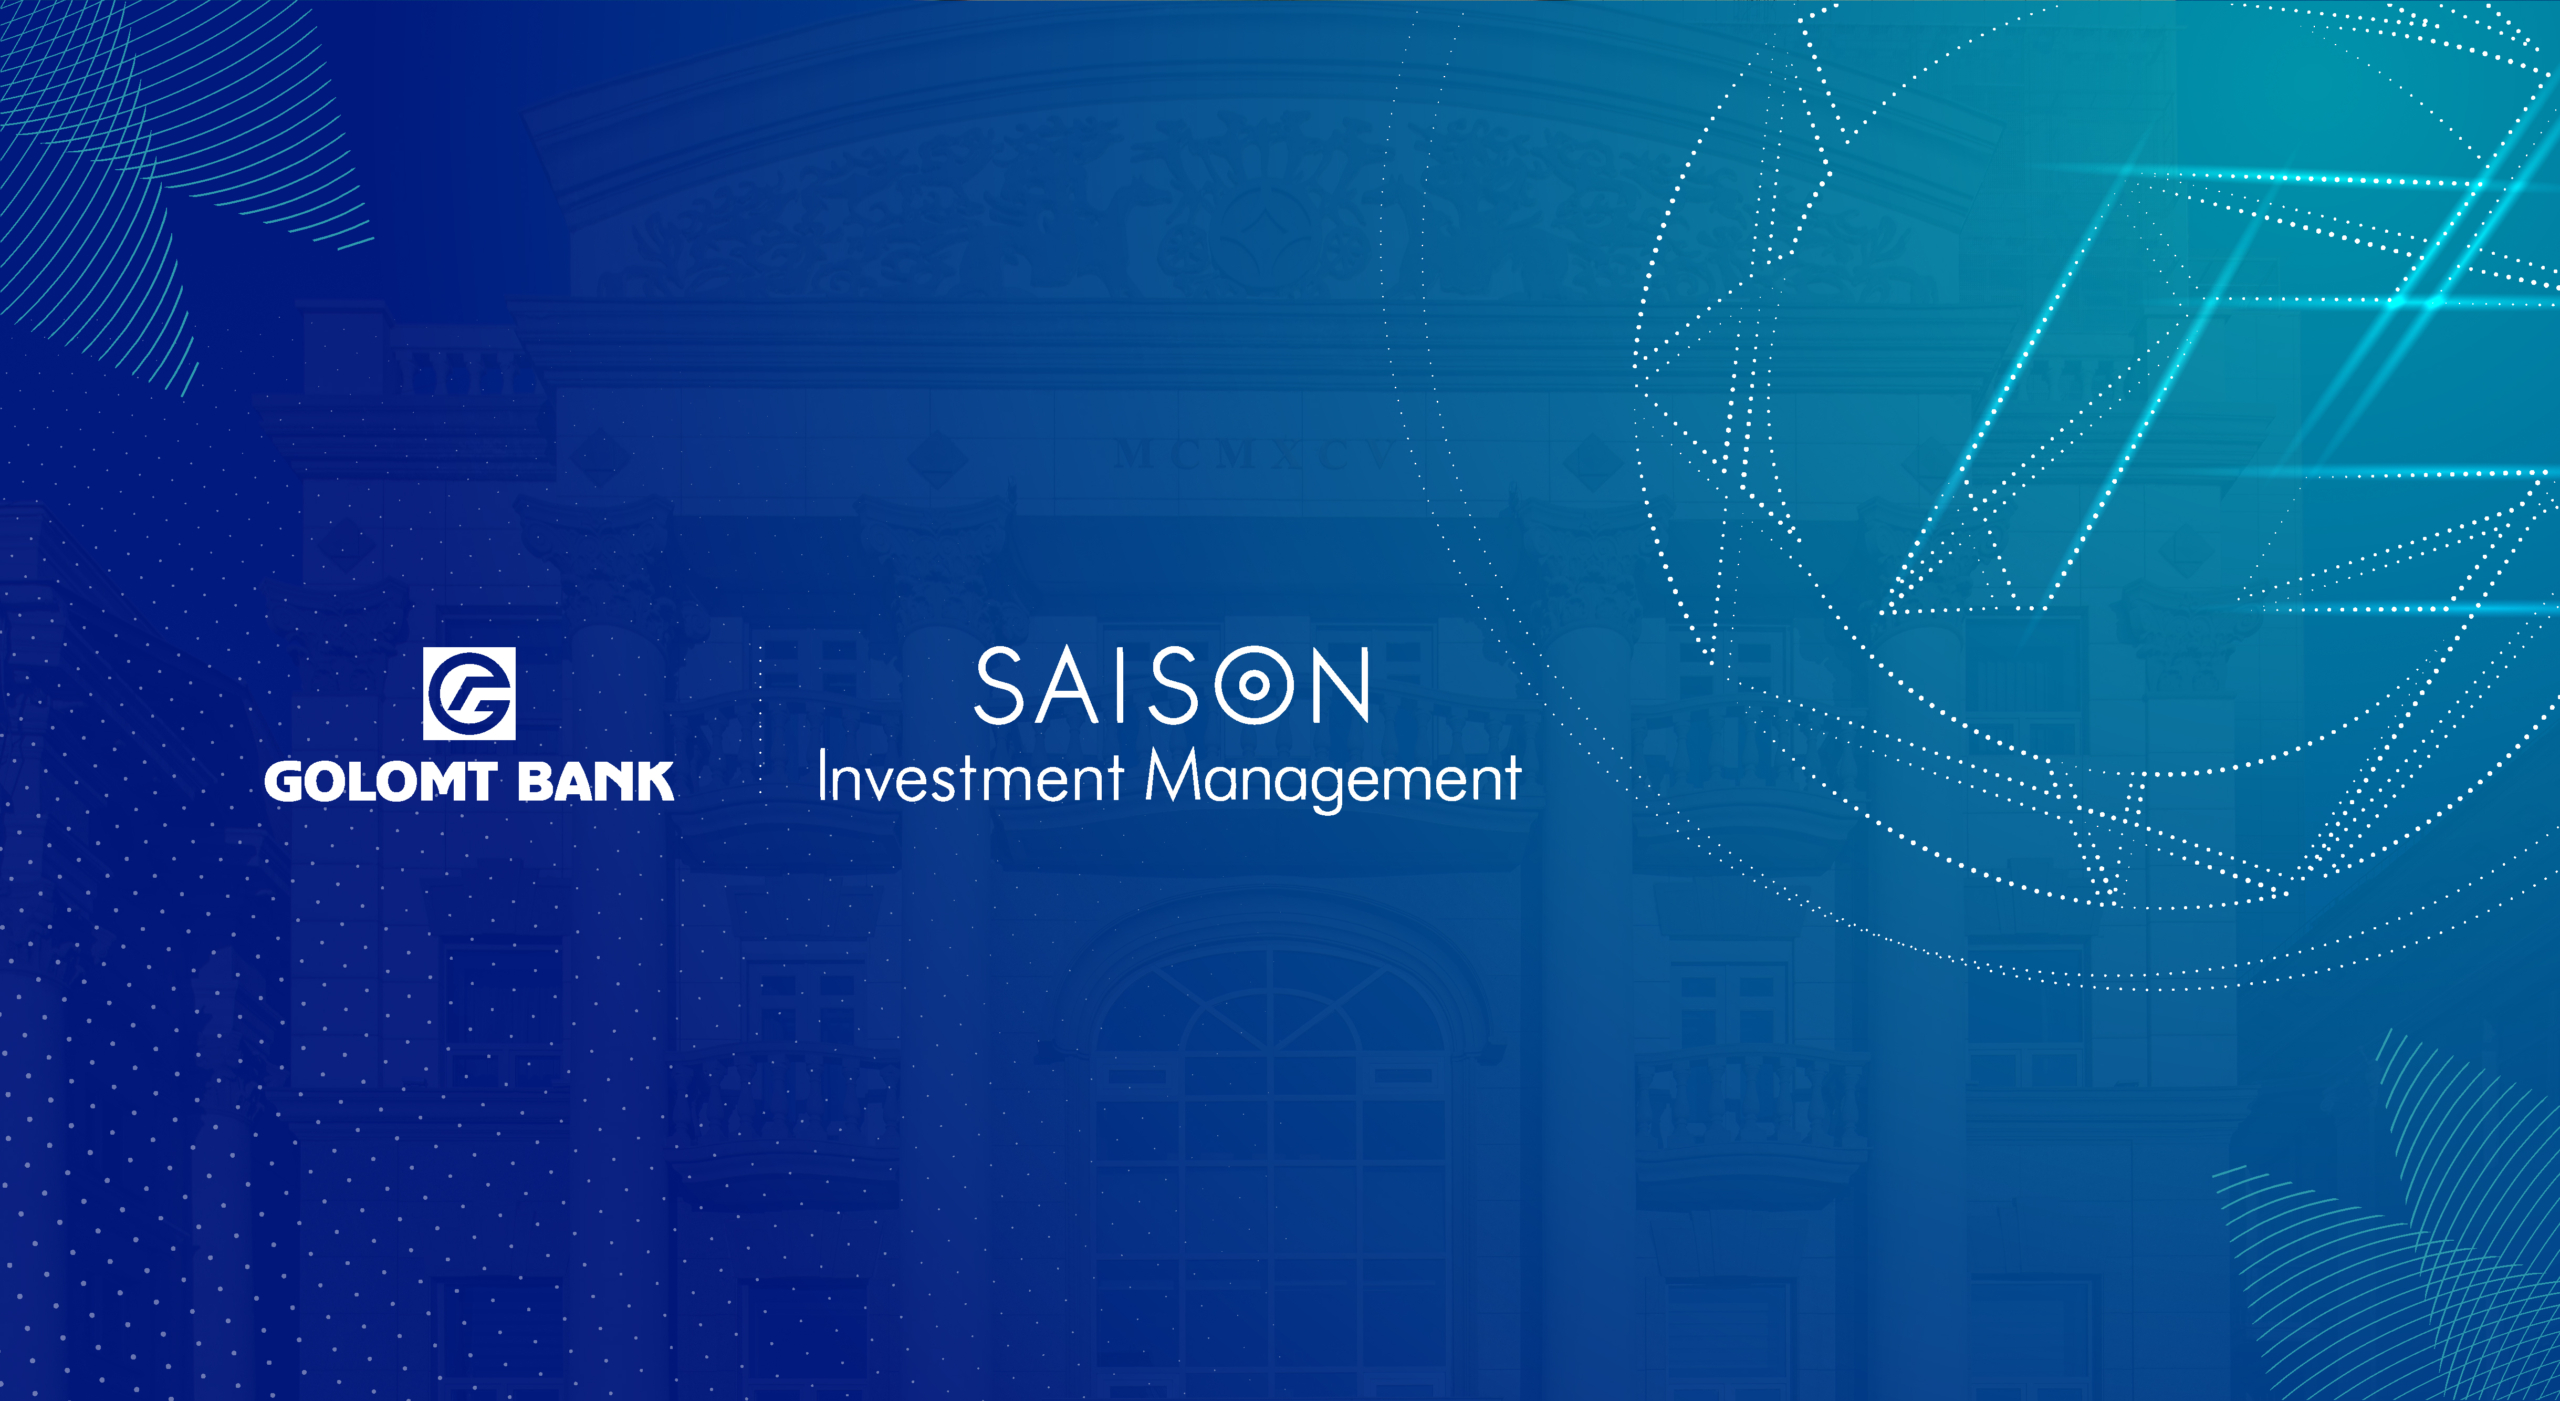 Golomt Bank signs long-term loan agreement with Saison Investment Management Private Limited